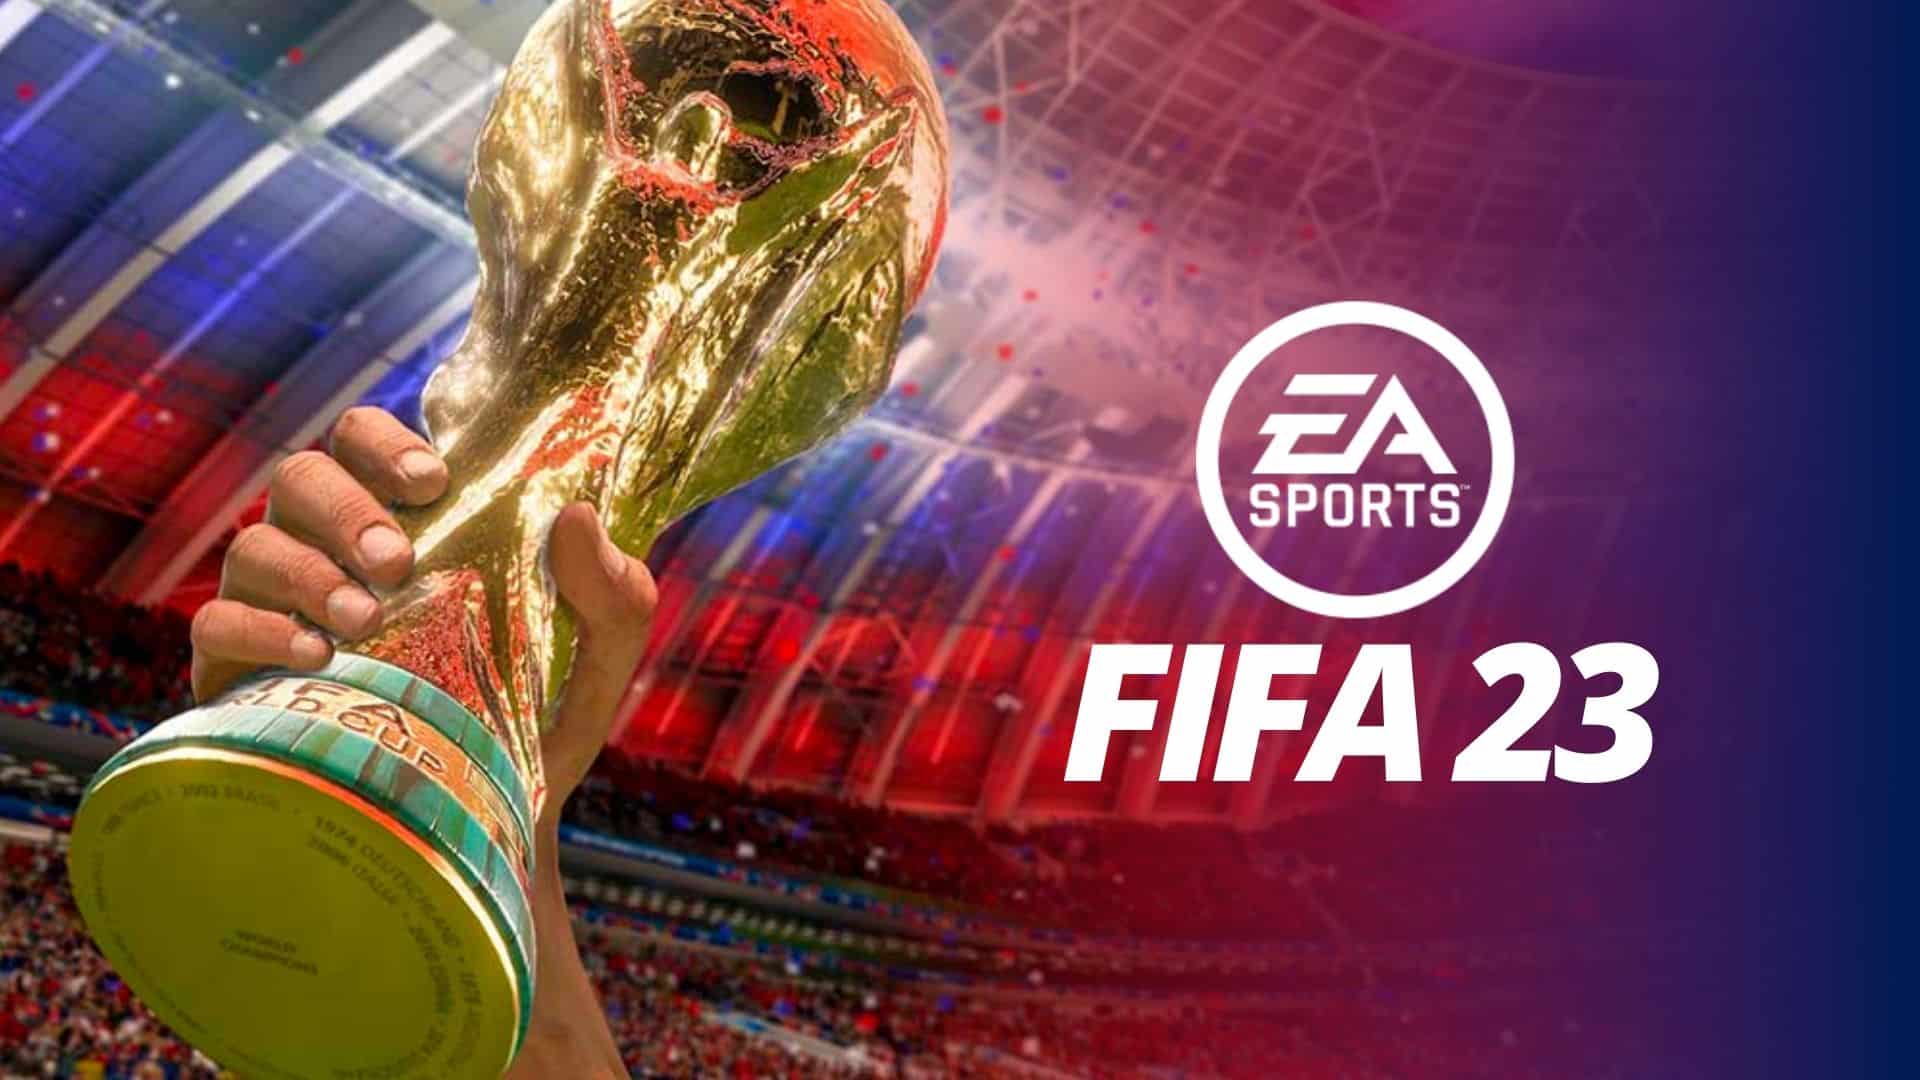 FIFA 23 Will Reportedly Feature Cross Play For The First Time In The Series' History